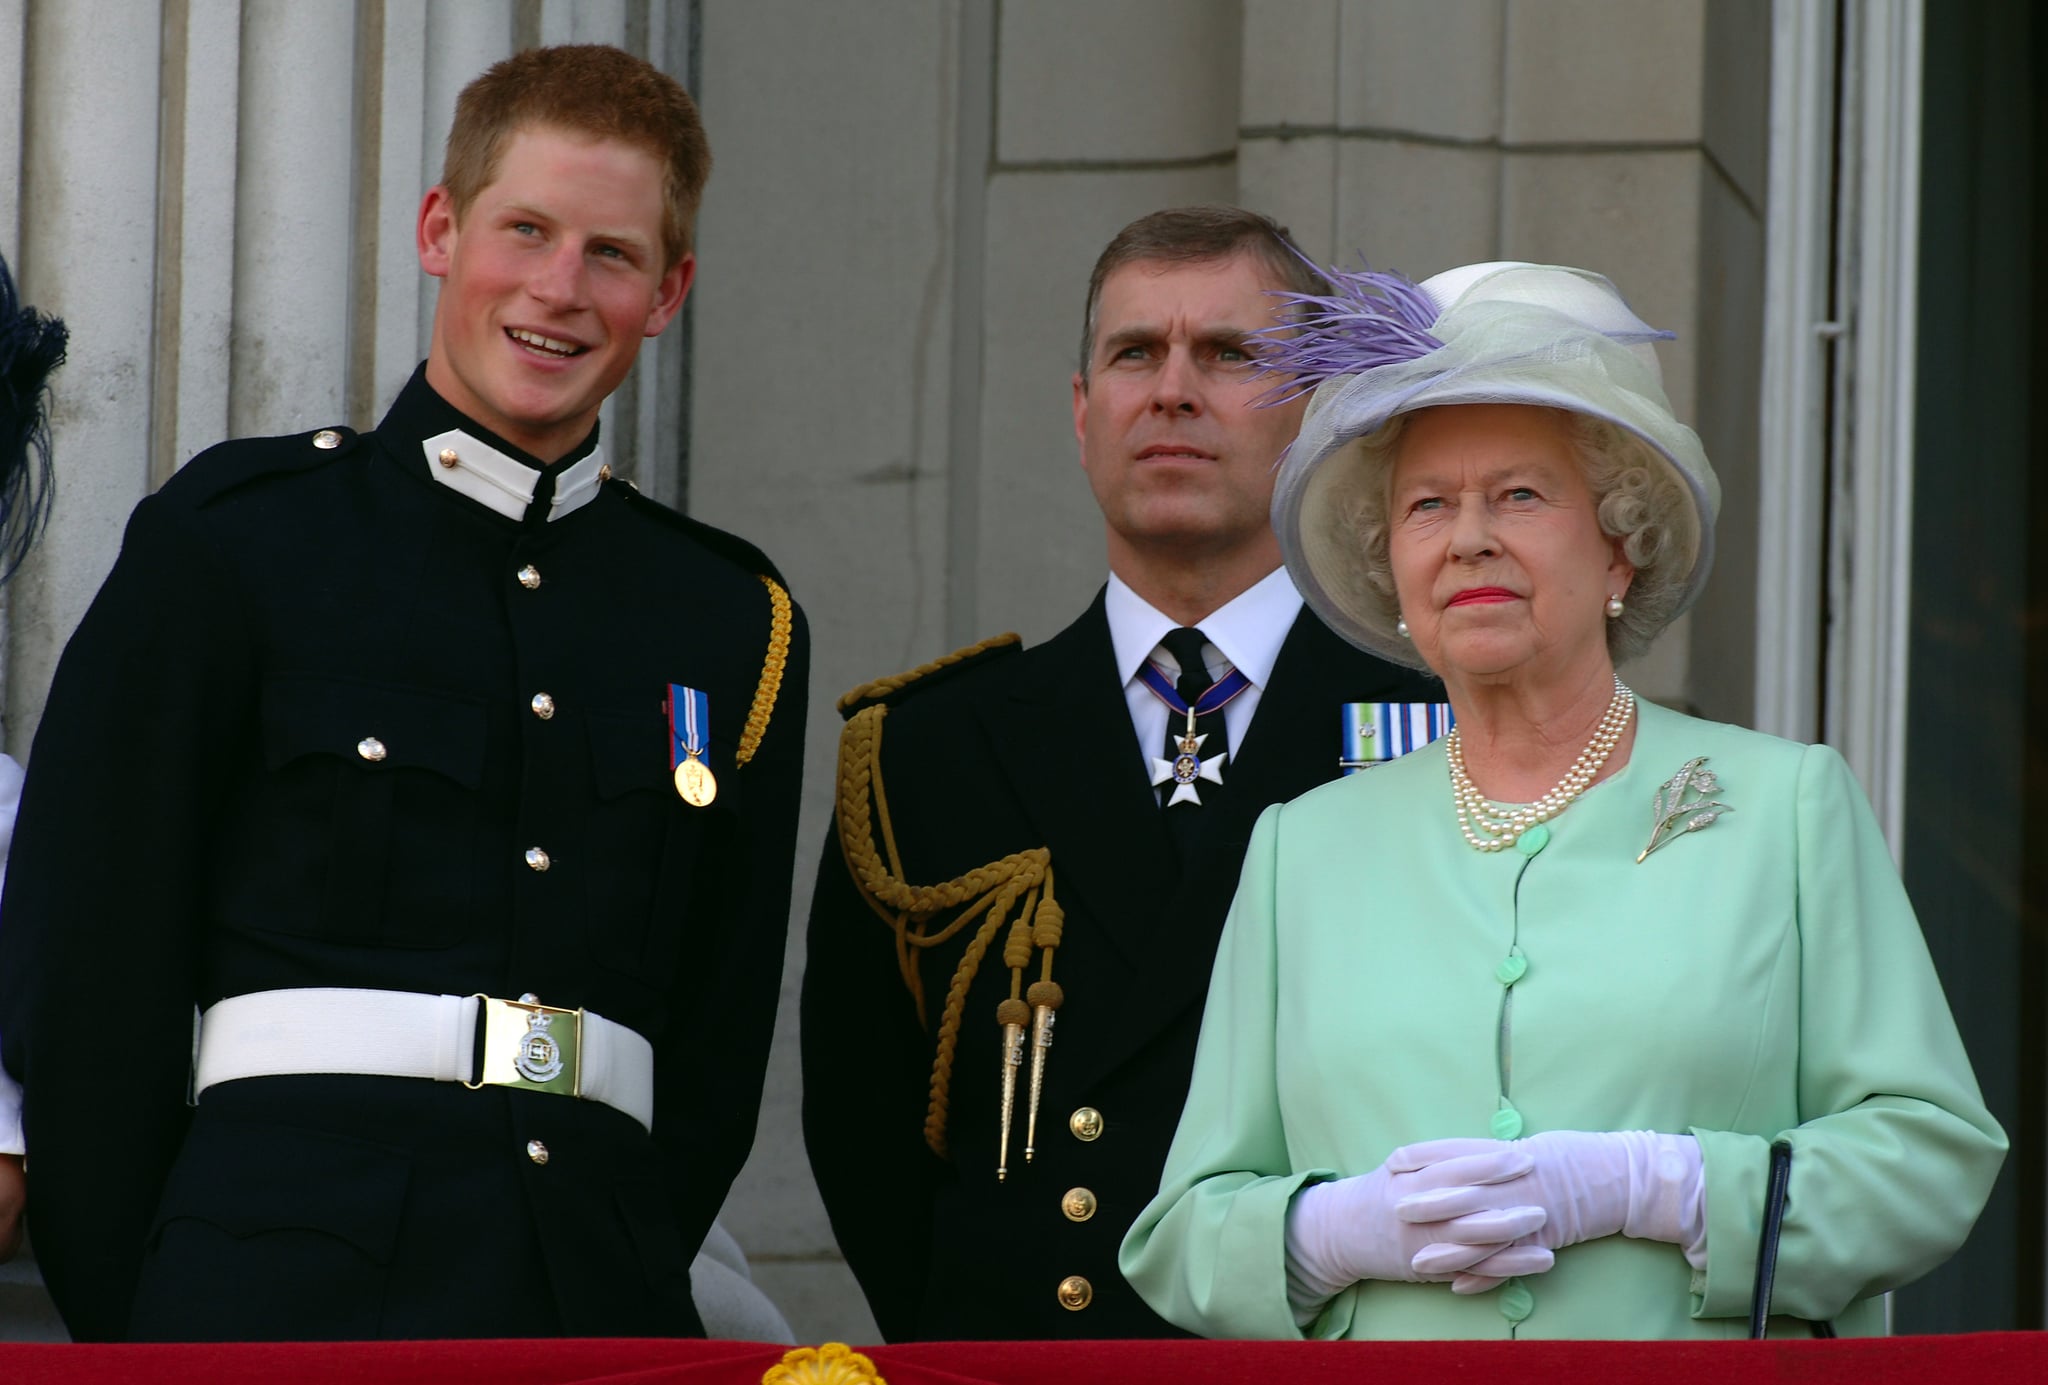 Queen Elizabeth II with Prince Harry and Prince Andrew in 2005